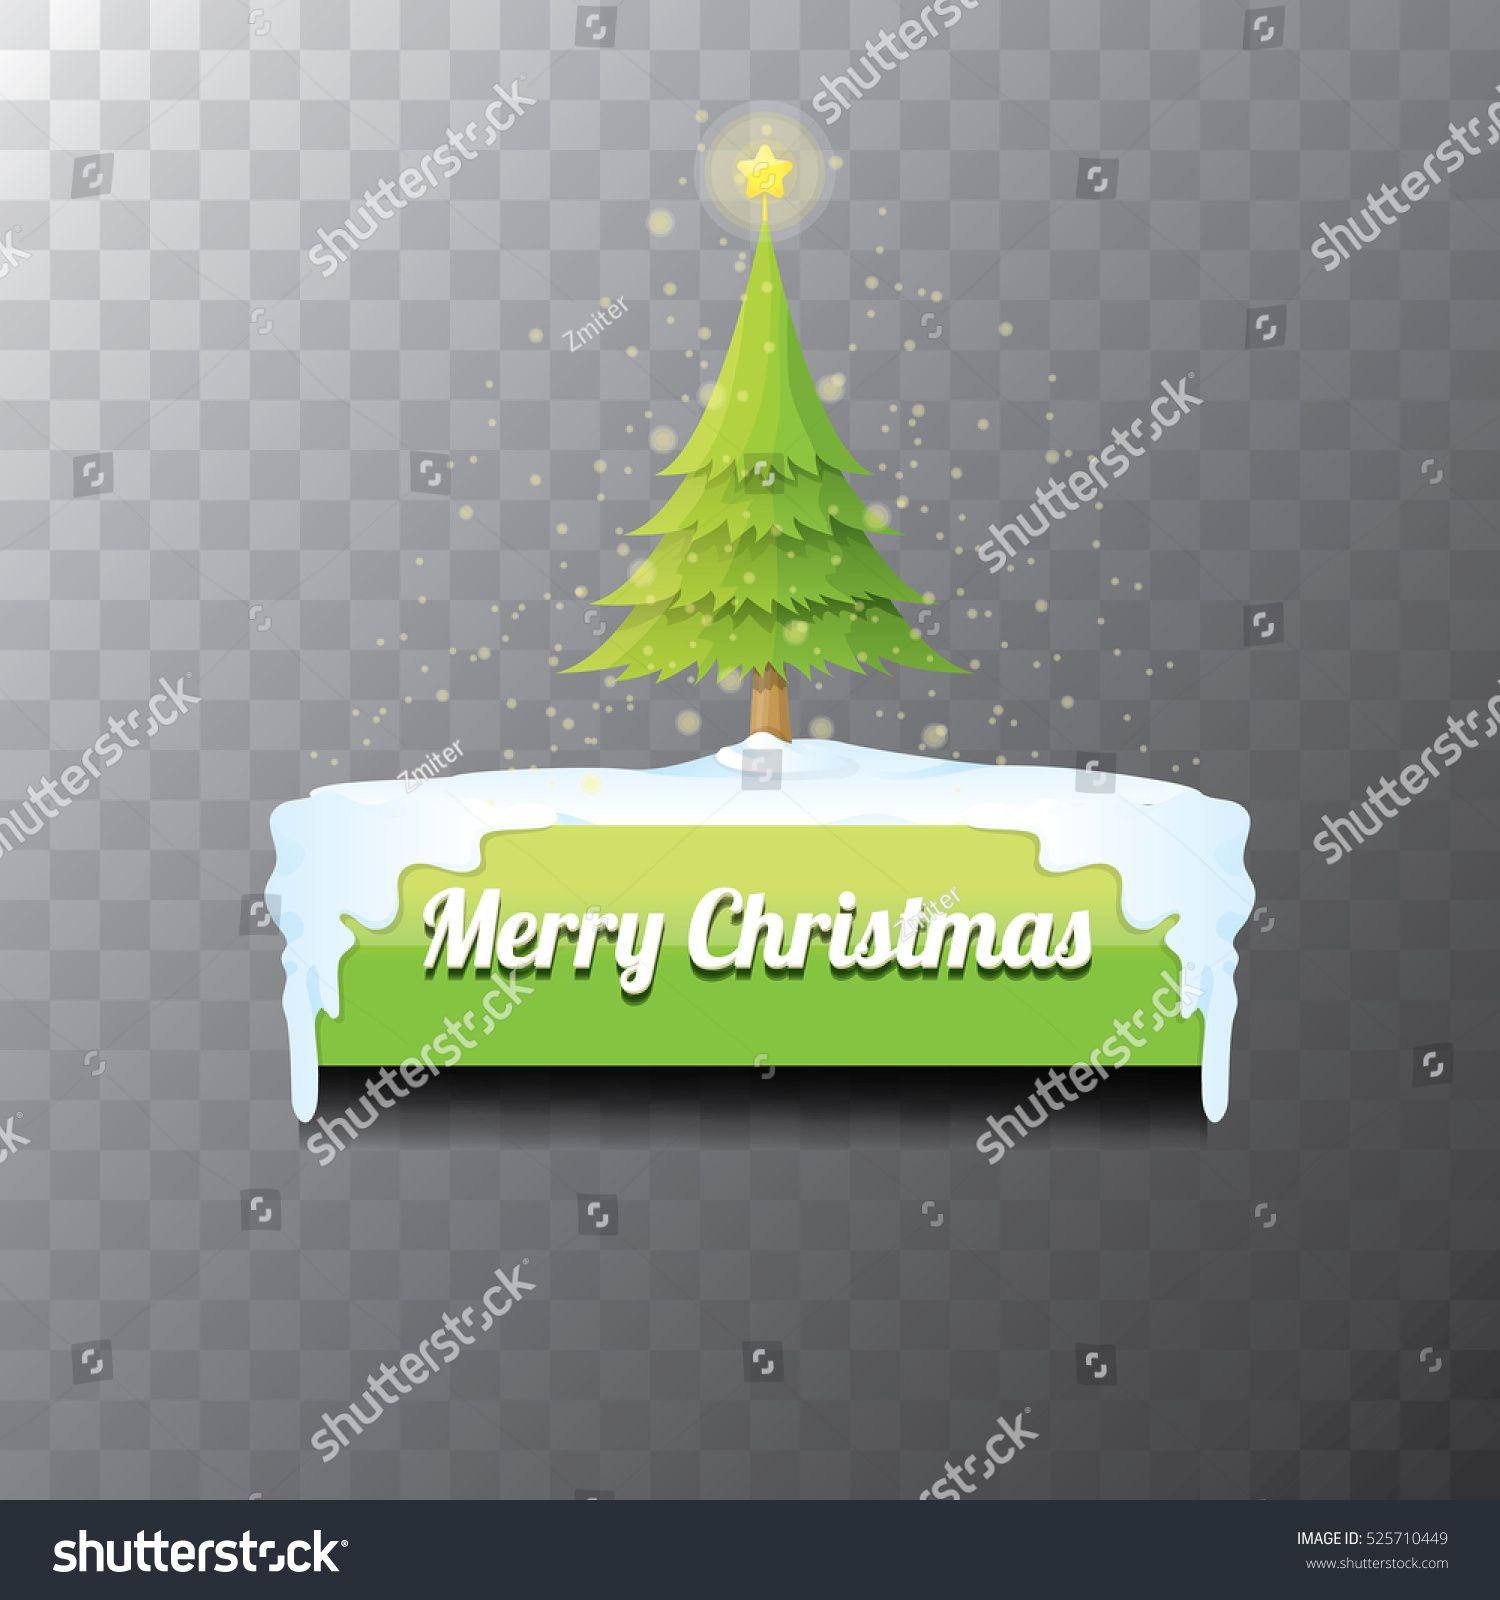 Merry Christmas Vector Green Glossy Button With Cartoon